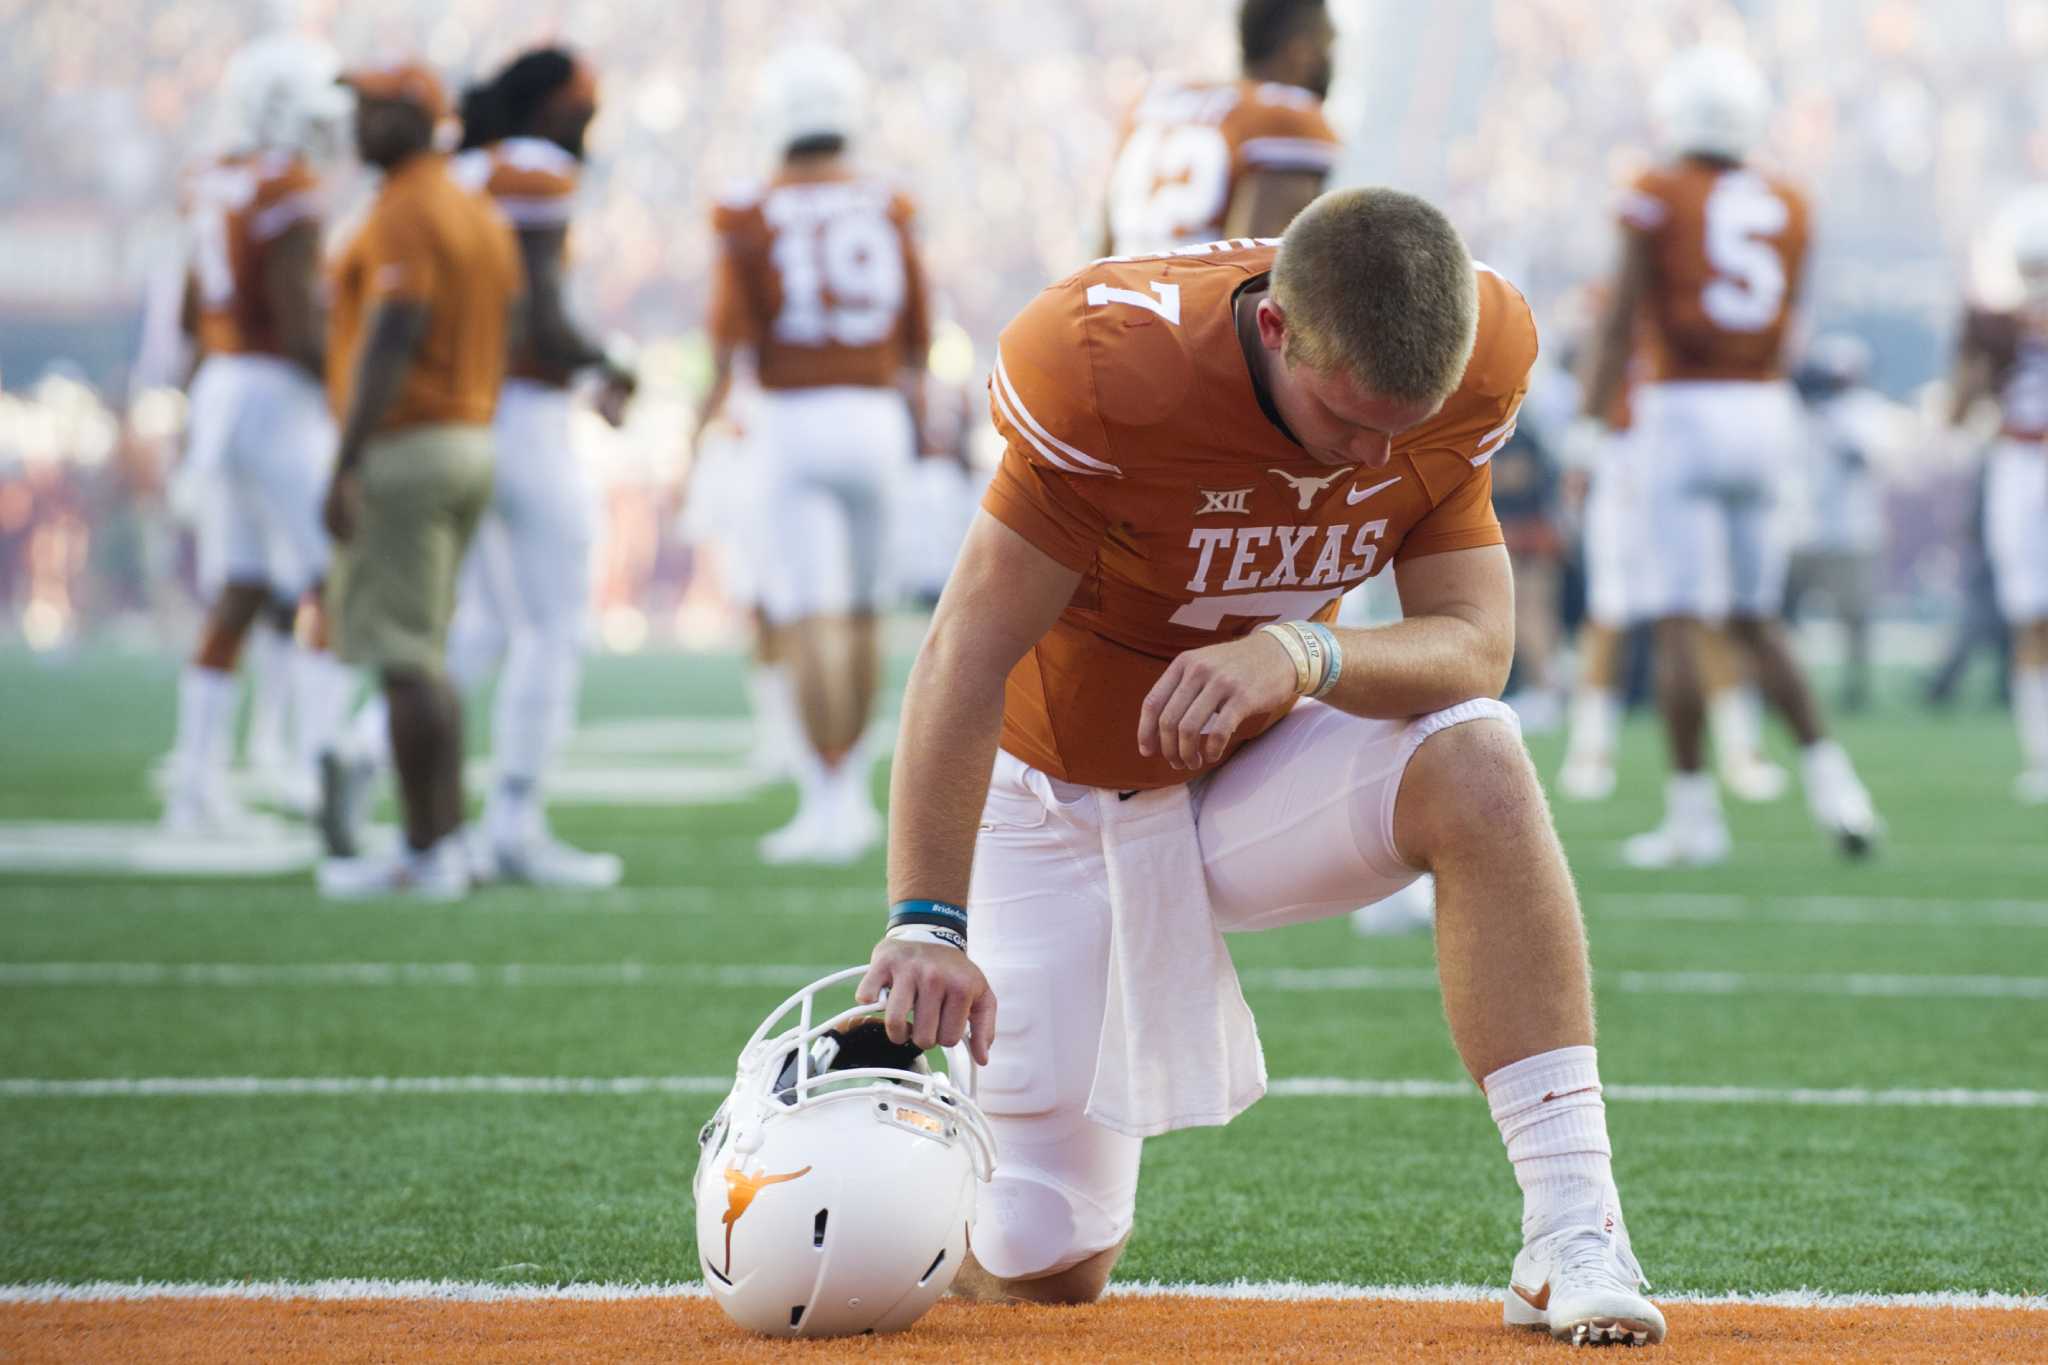 Texas' Shane Buechele remains calm, cool and collected